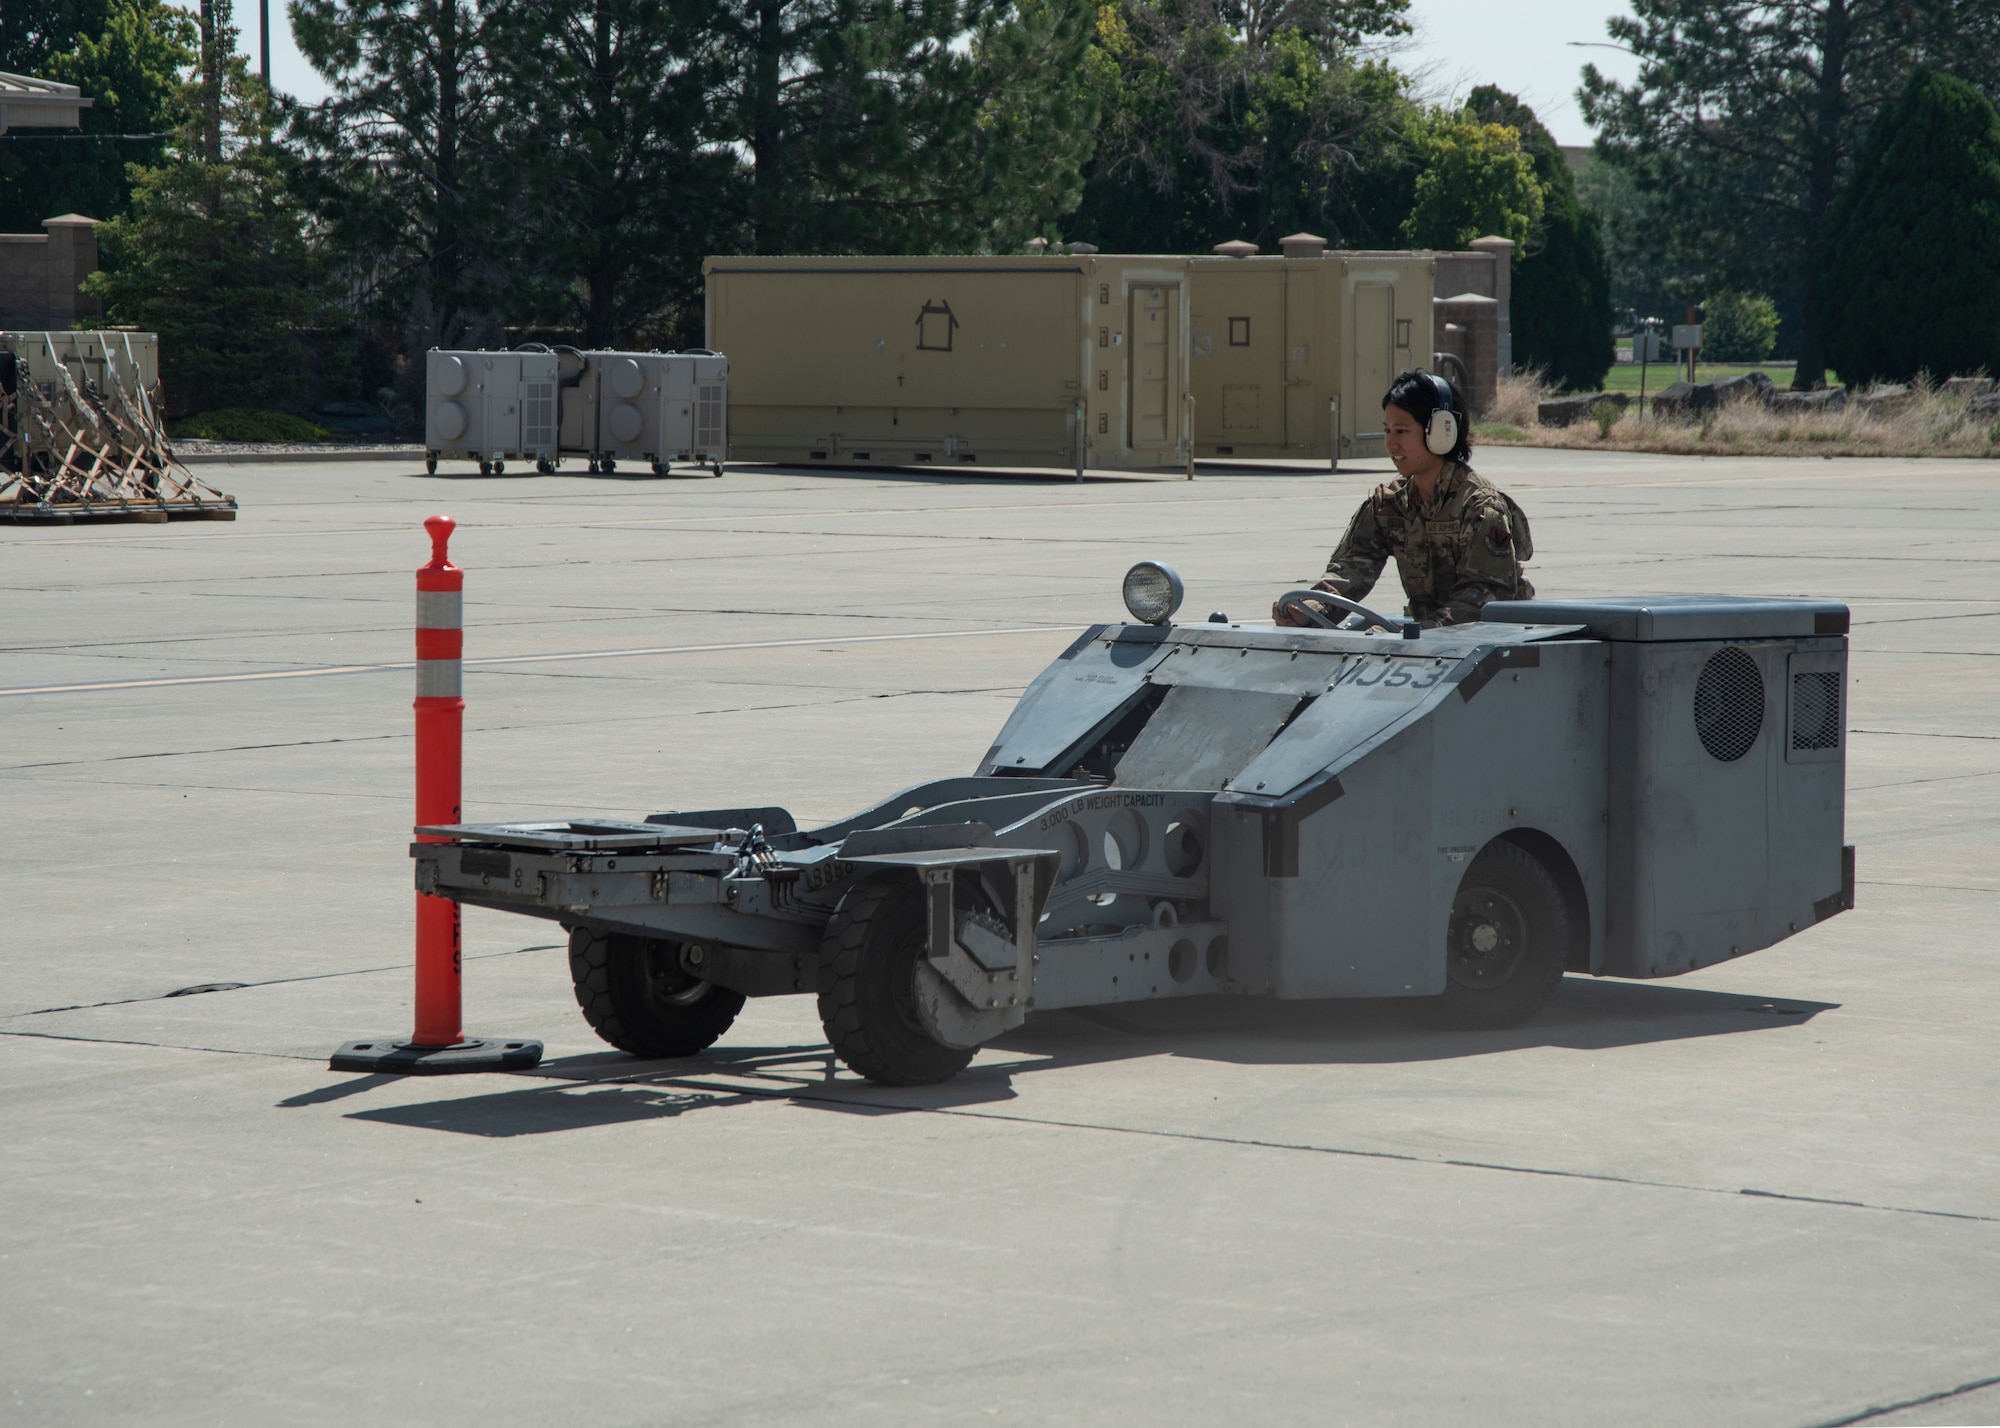 An Airman drives a jammer vehicle between cones.